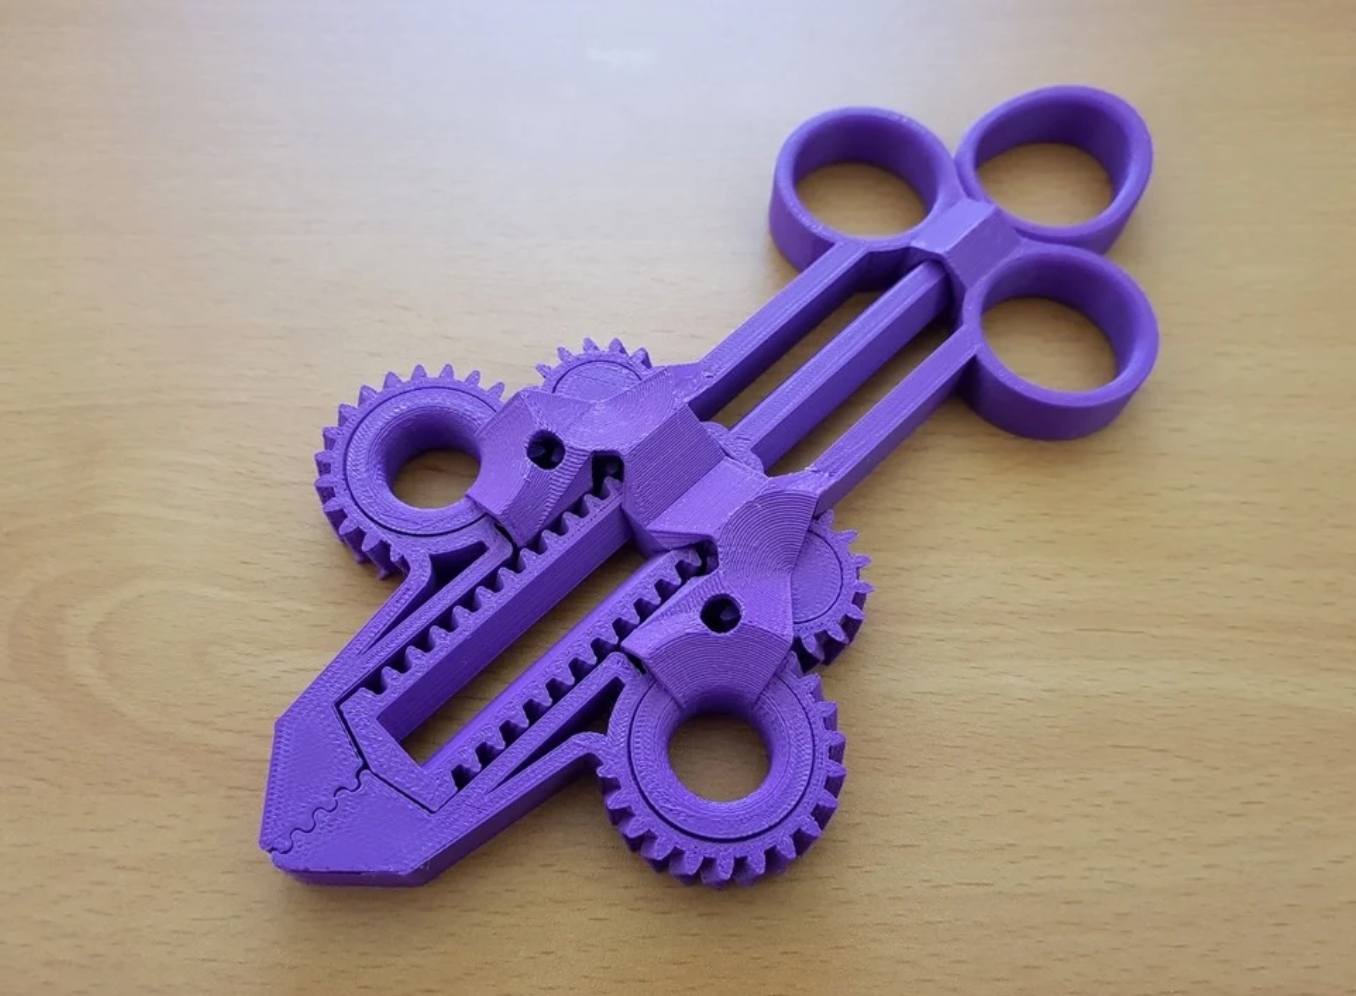 Print-in-Place Action Pliers